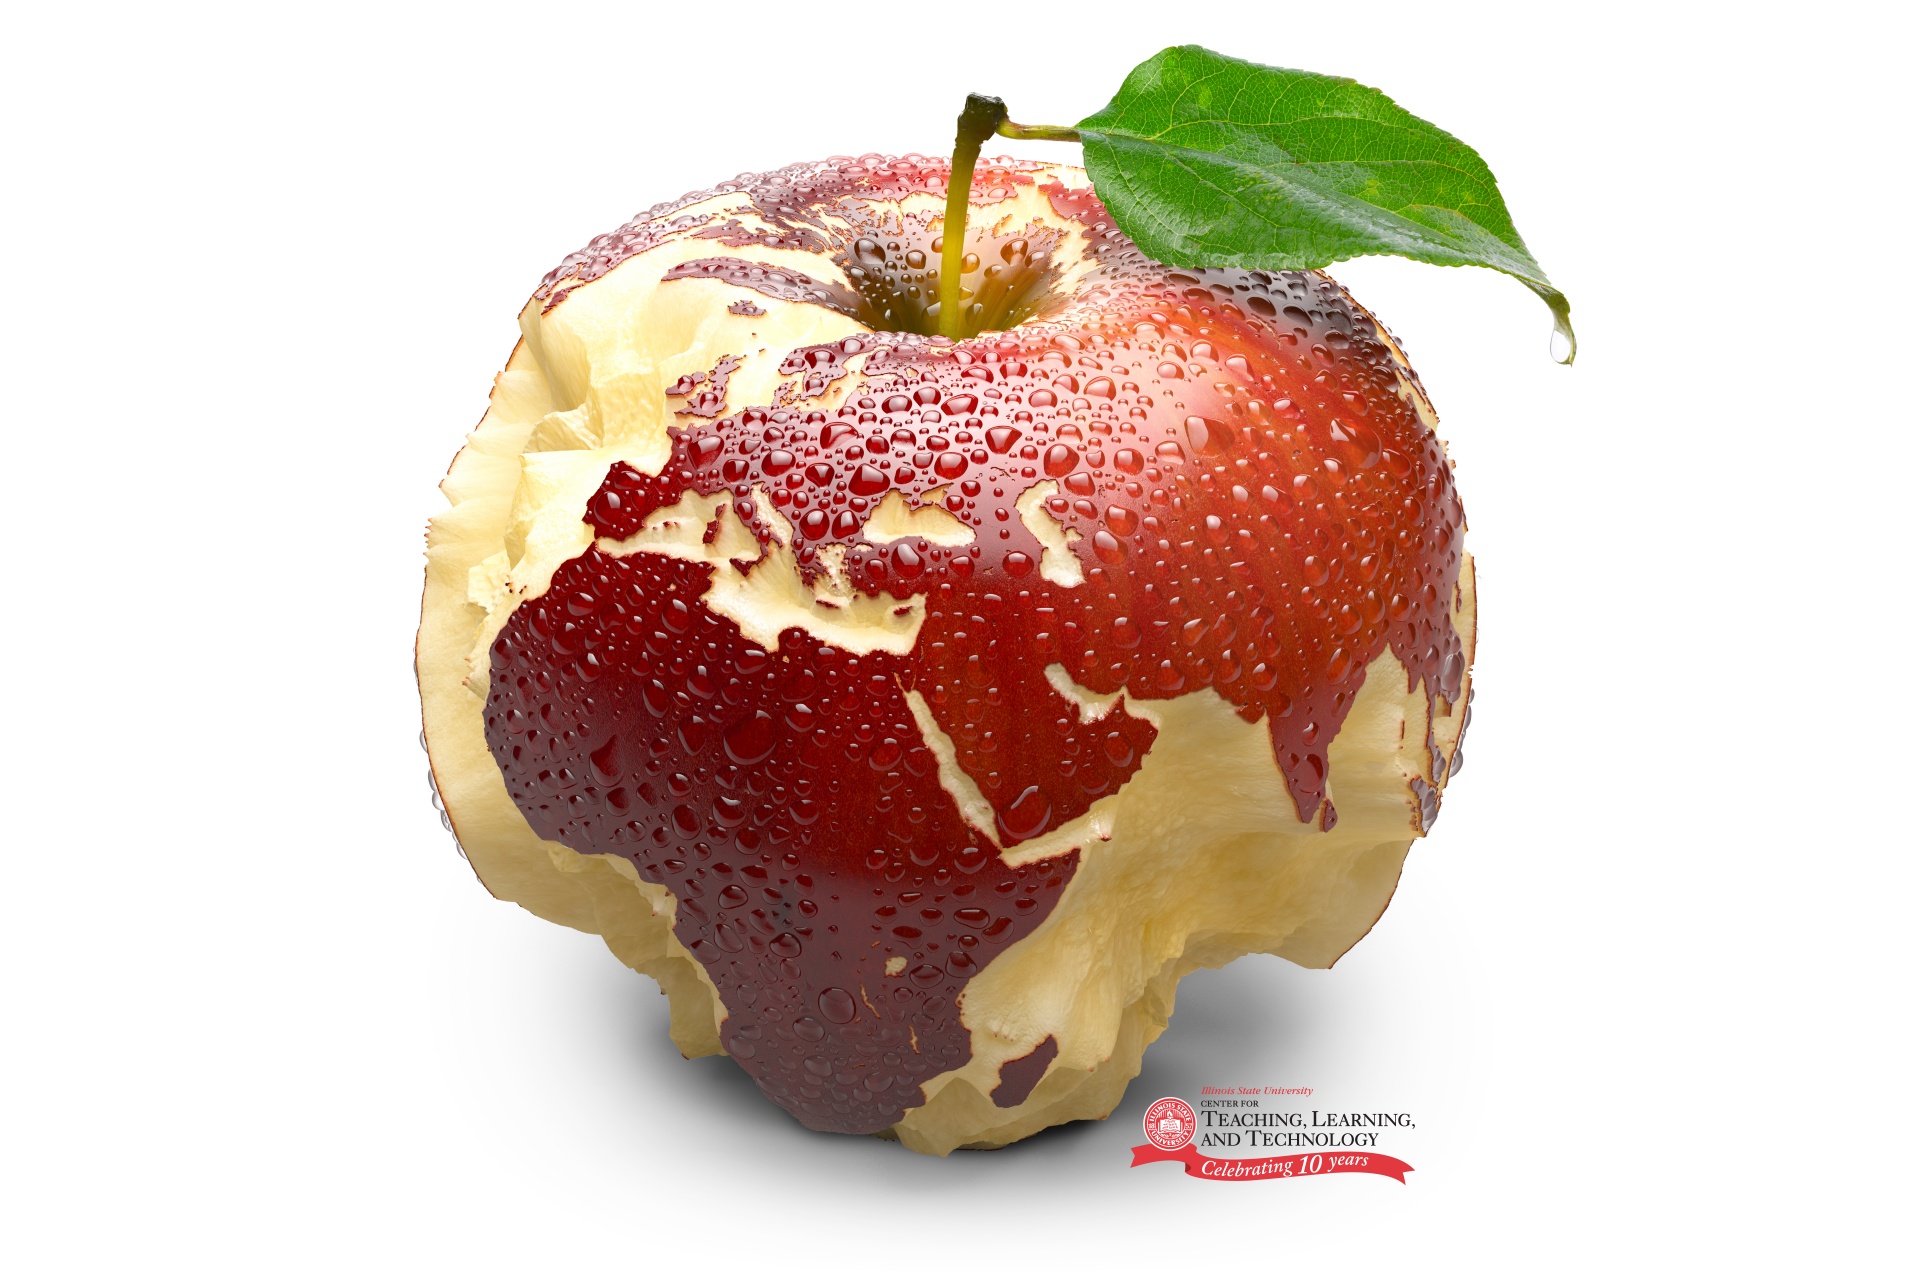 Apple in the shape of a globe with CTLT logo